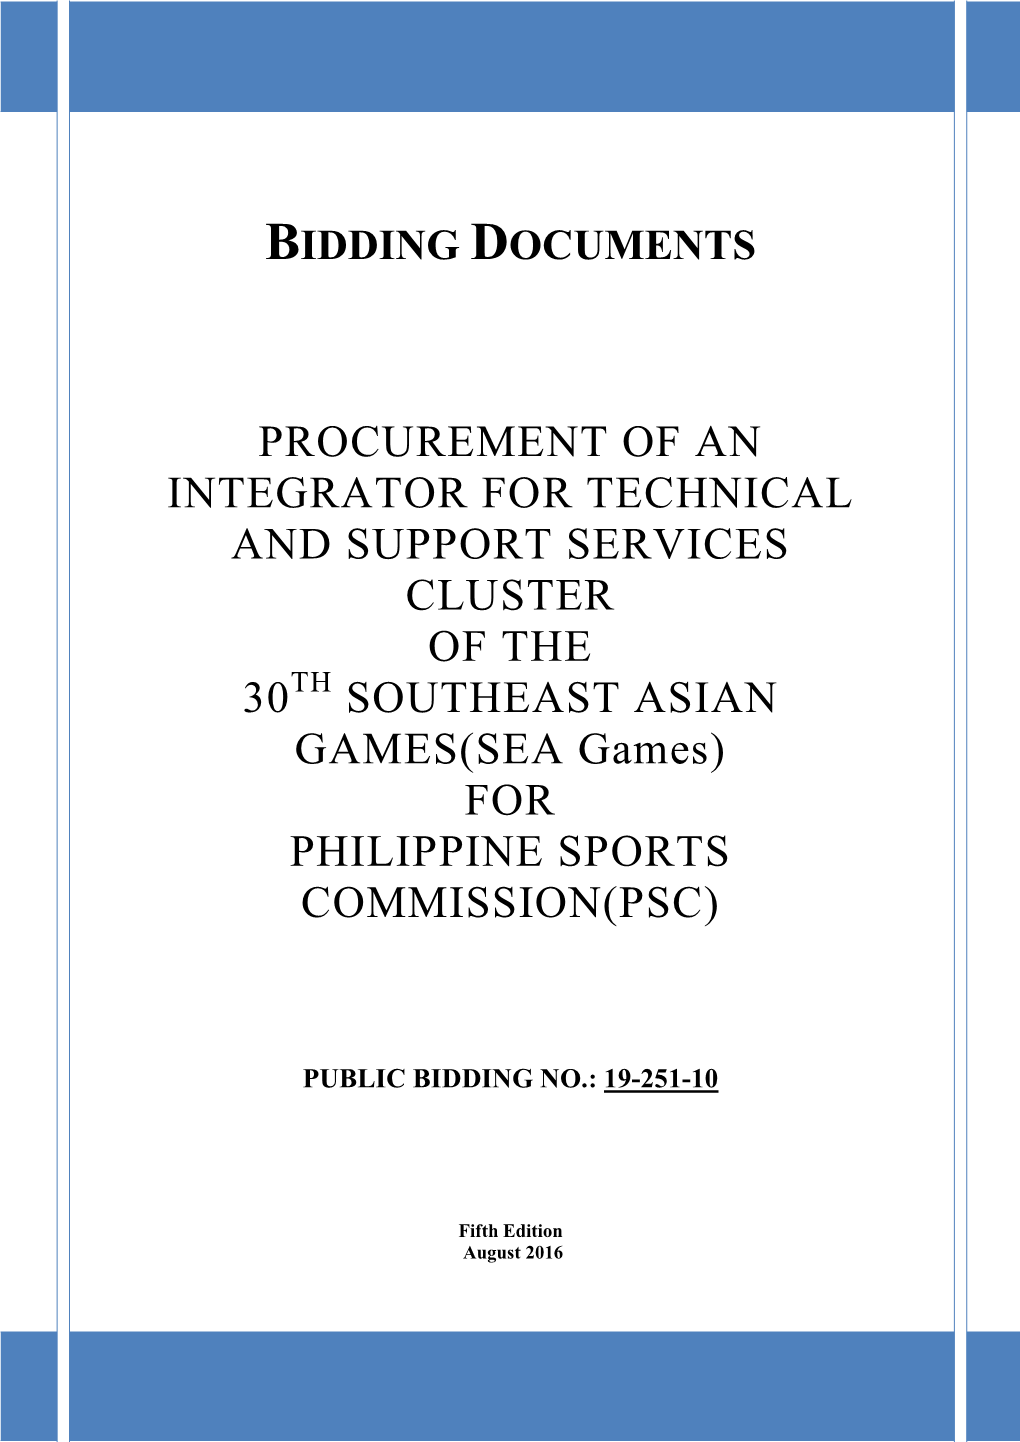 PROCUREMENT of an INTEGRATOR for TECHNICAL and SUPPORT SERVICES CLUSTER of the 30TH SOUTHEAST ASIAN GAMES(SEA Games) for PHILIPPINE SPORTS COMMISSION(PSC)